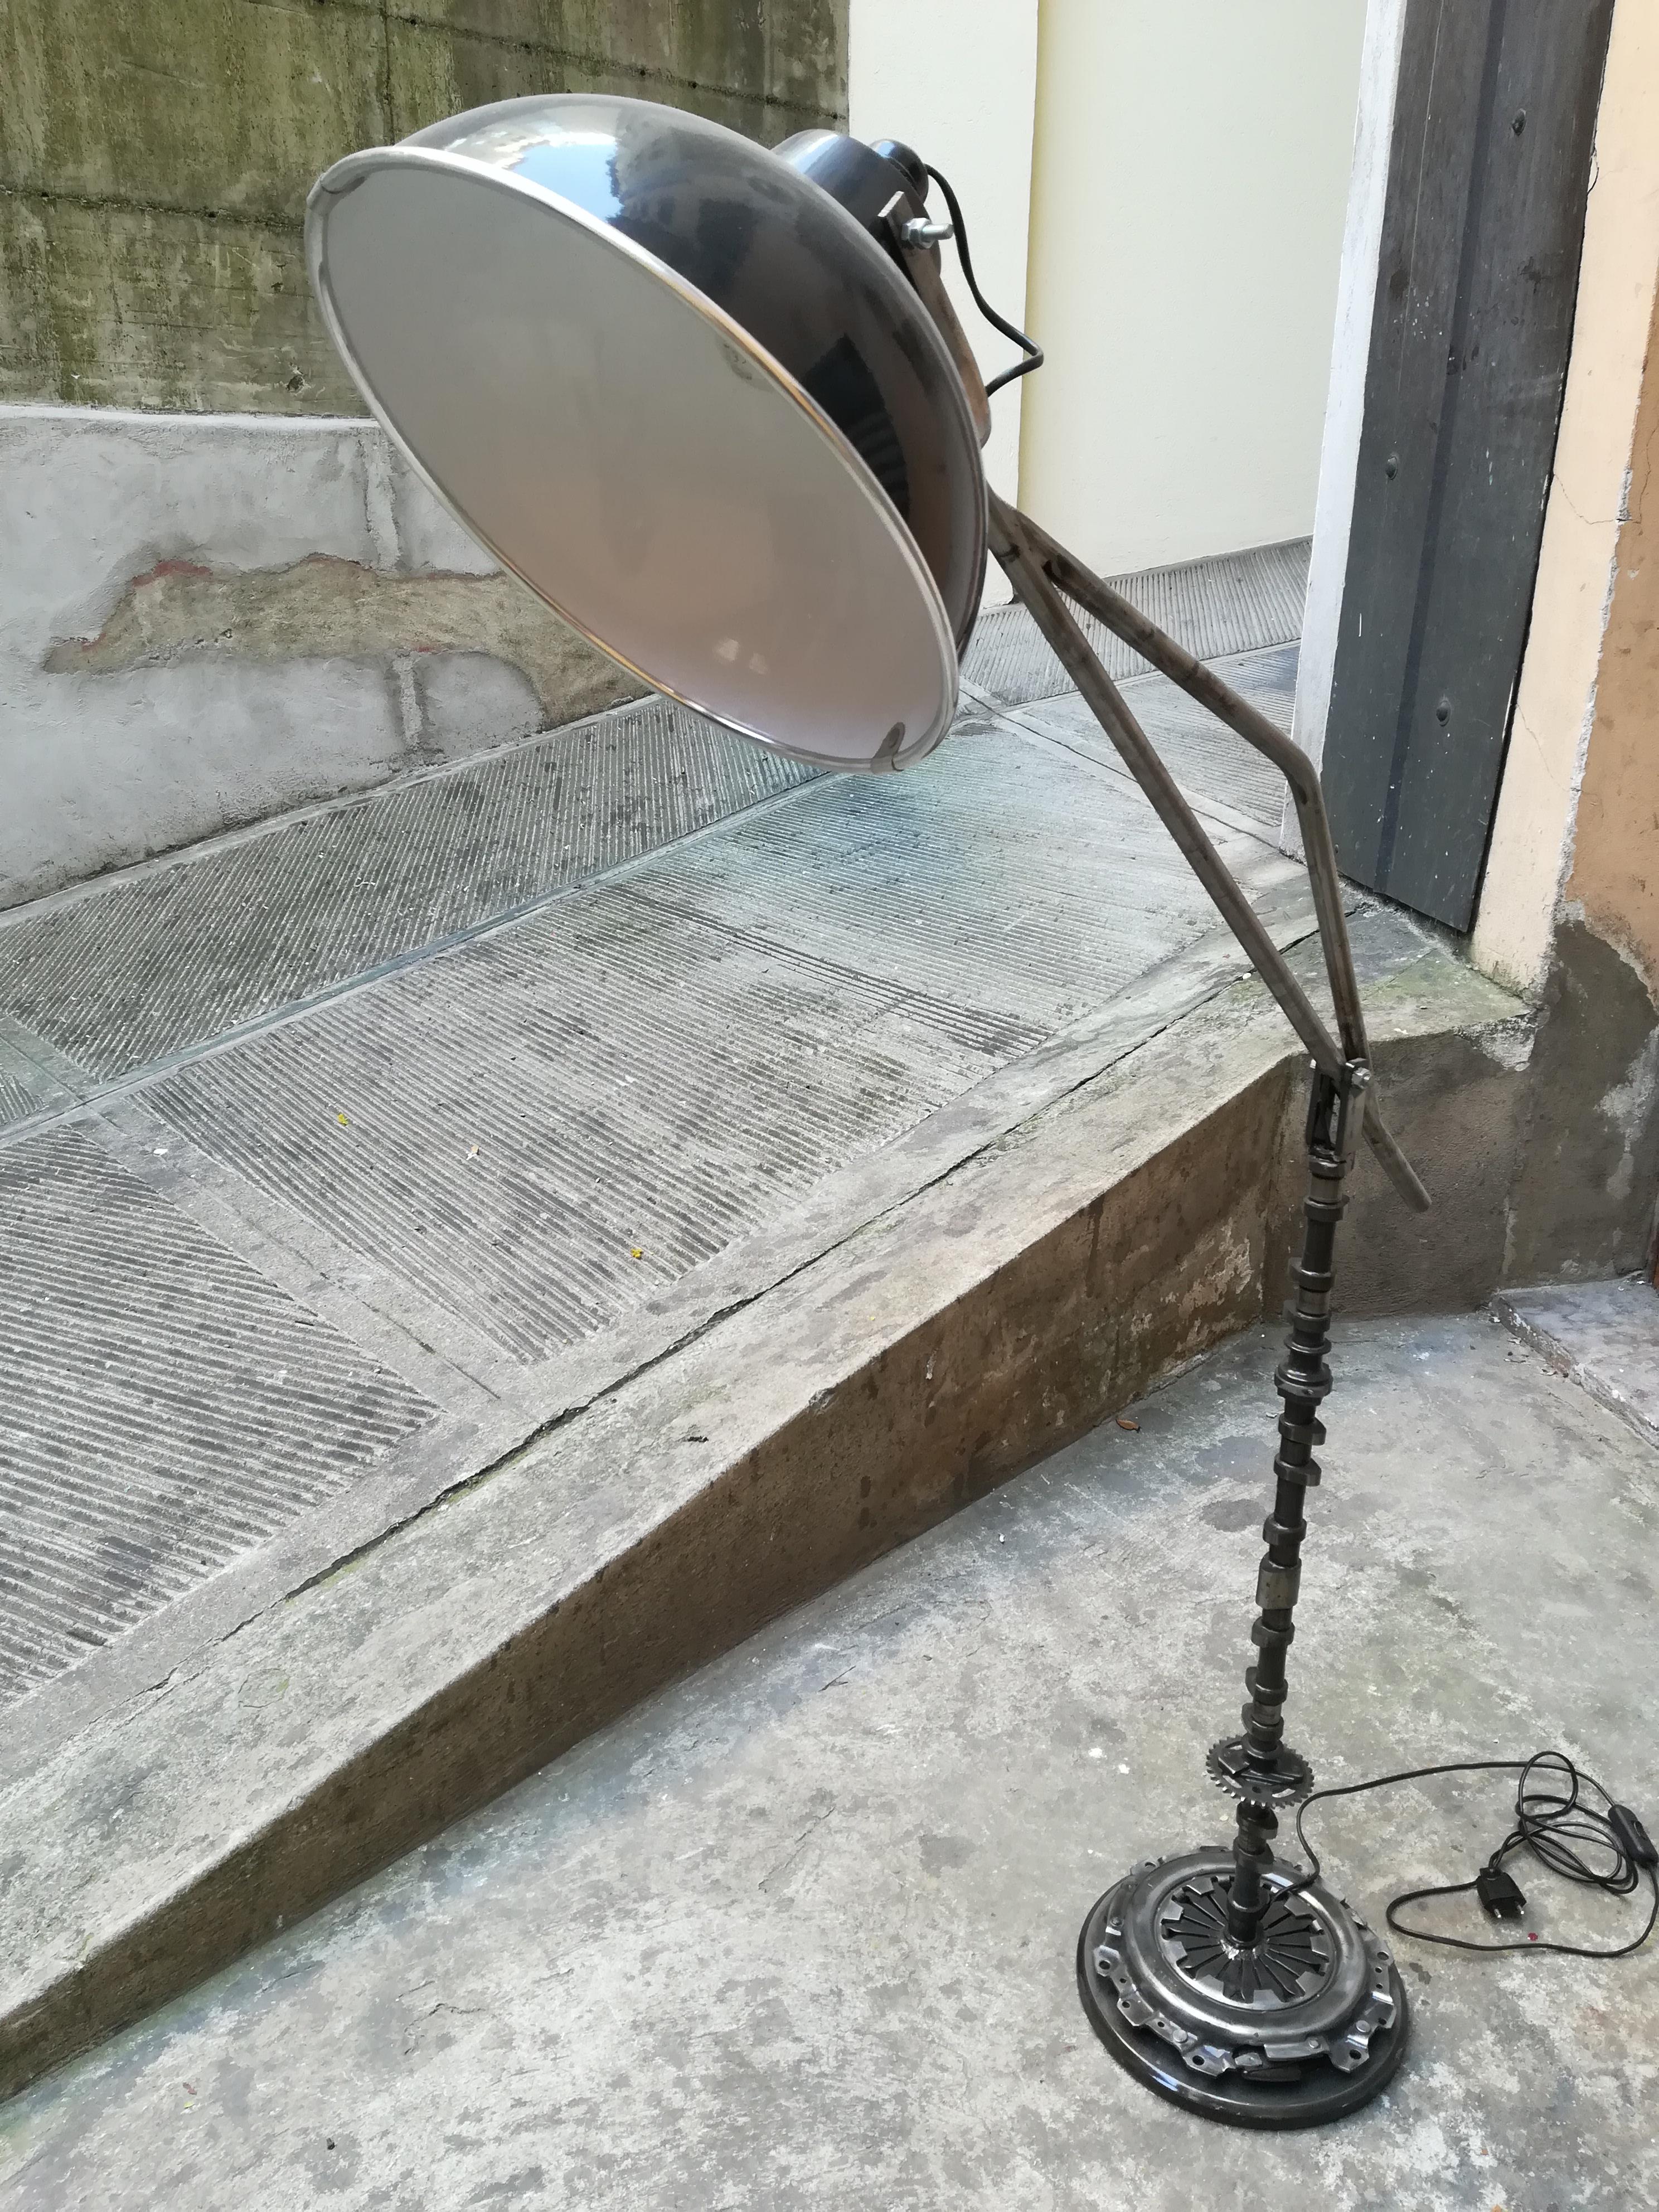 French 21st Century Upcycling Metal Floor Lamp Made by Old Car's Mechanism For Sale